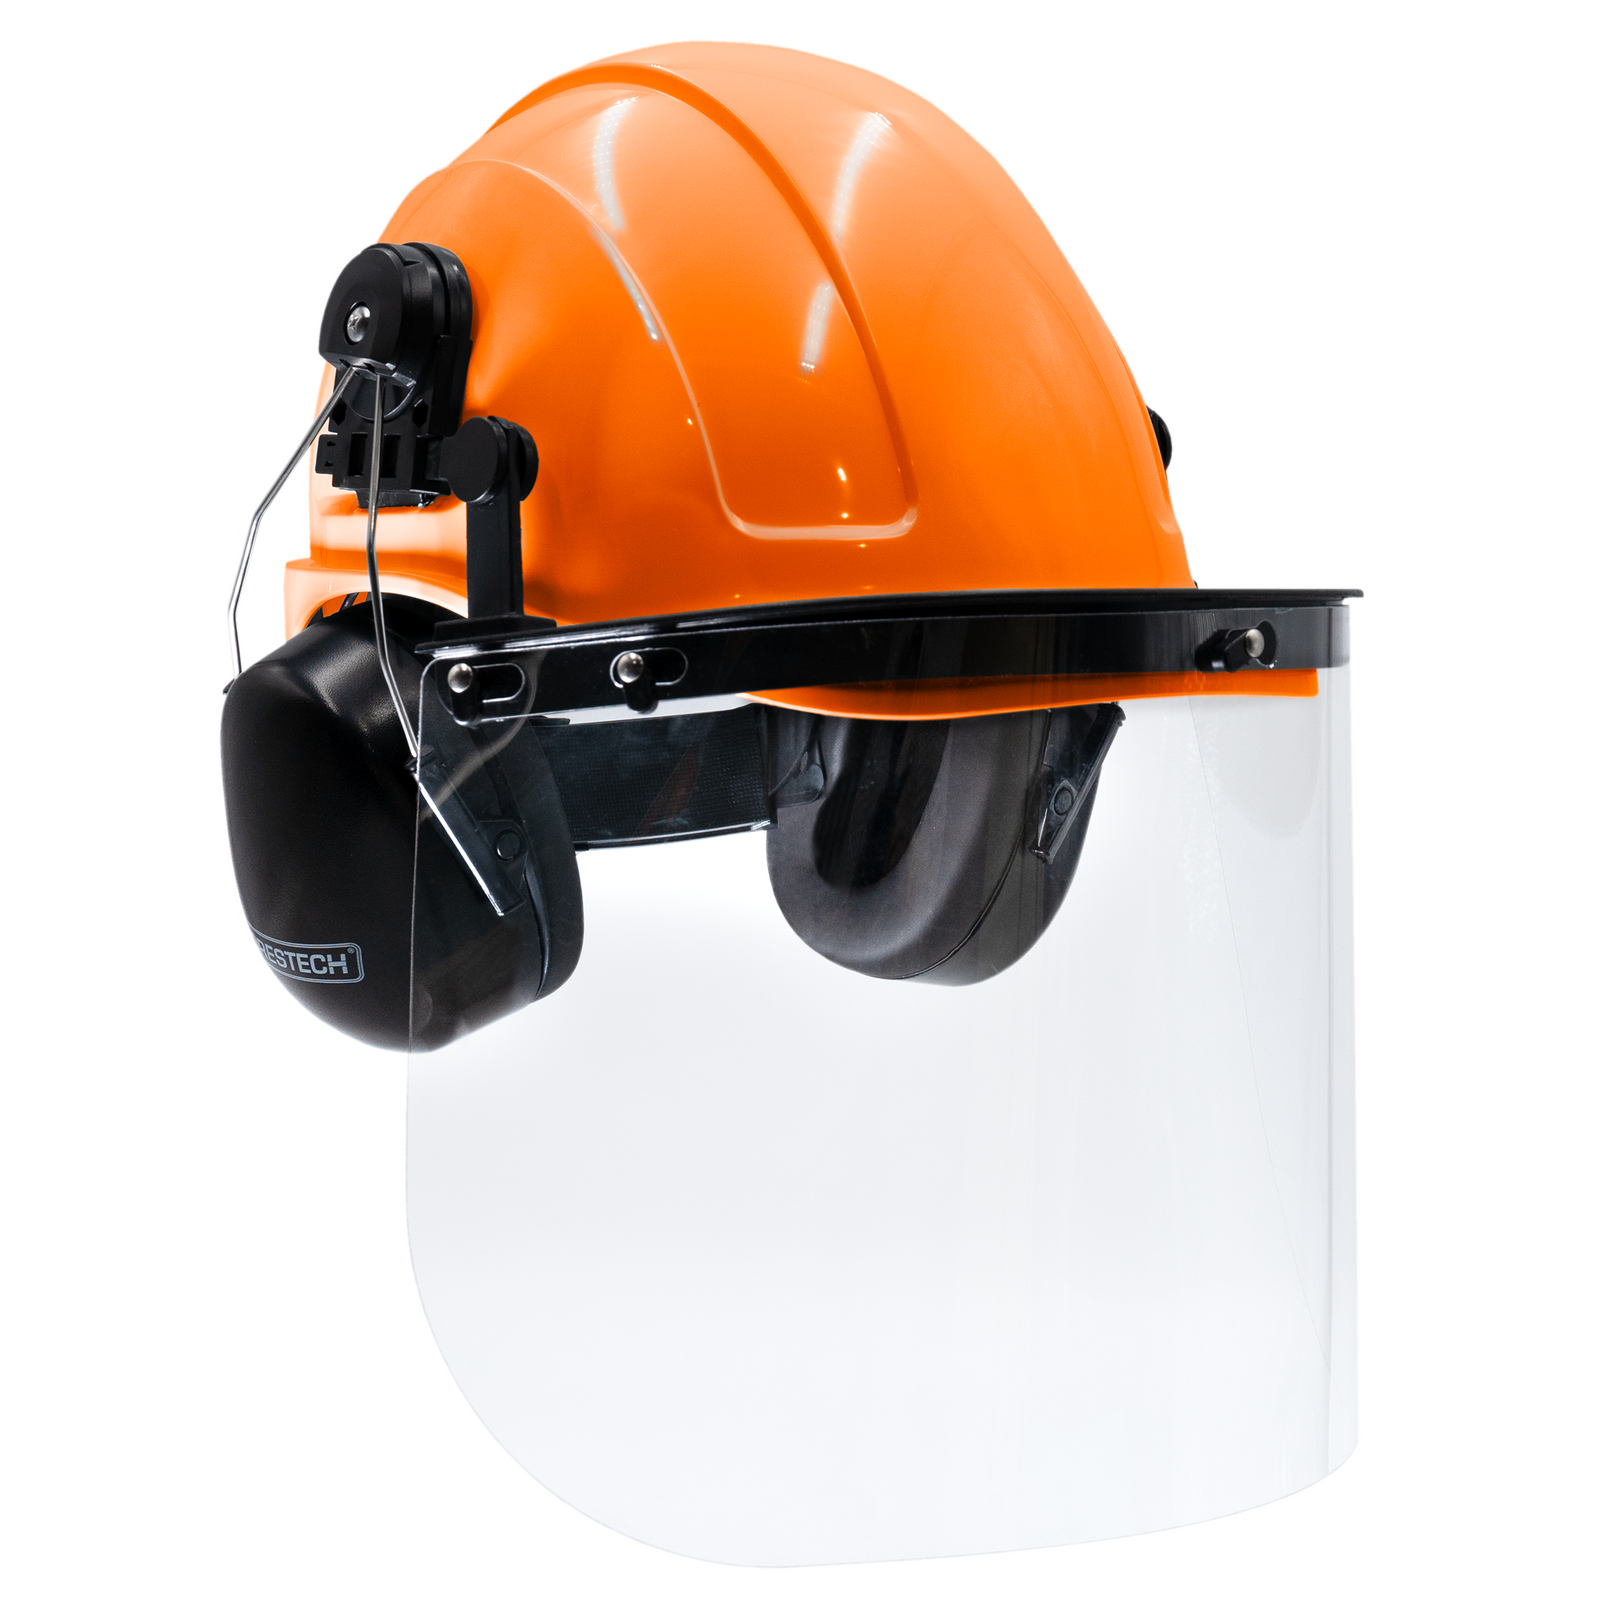 Orange cap style hard hat kit with mountable earmuffs and hi-transparency face shield